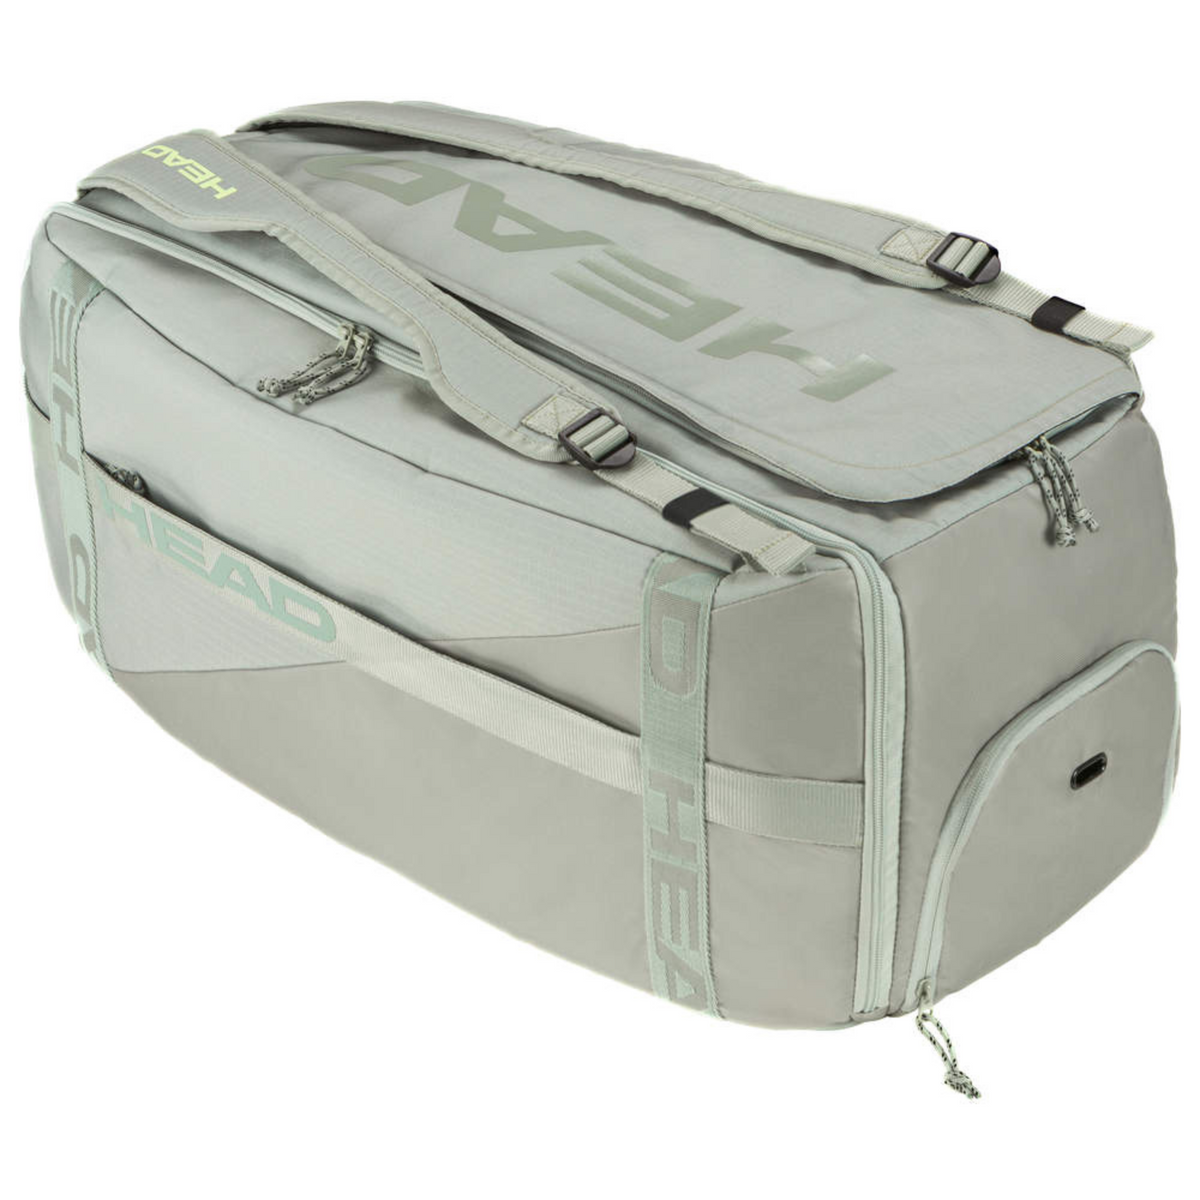 Large Tennis Duffle Bag Space for 9 Racquets